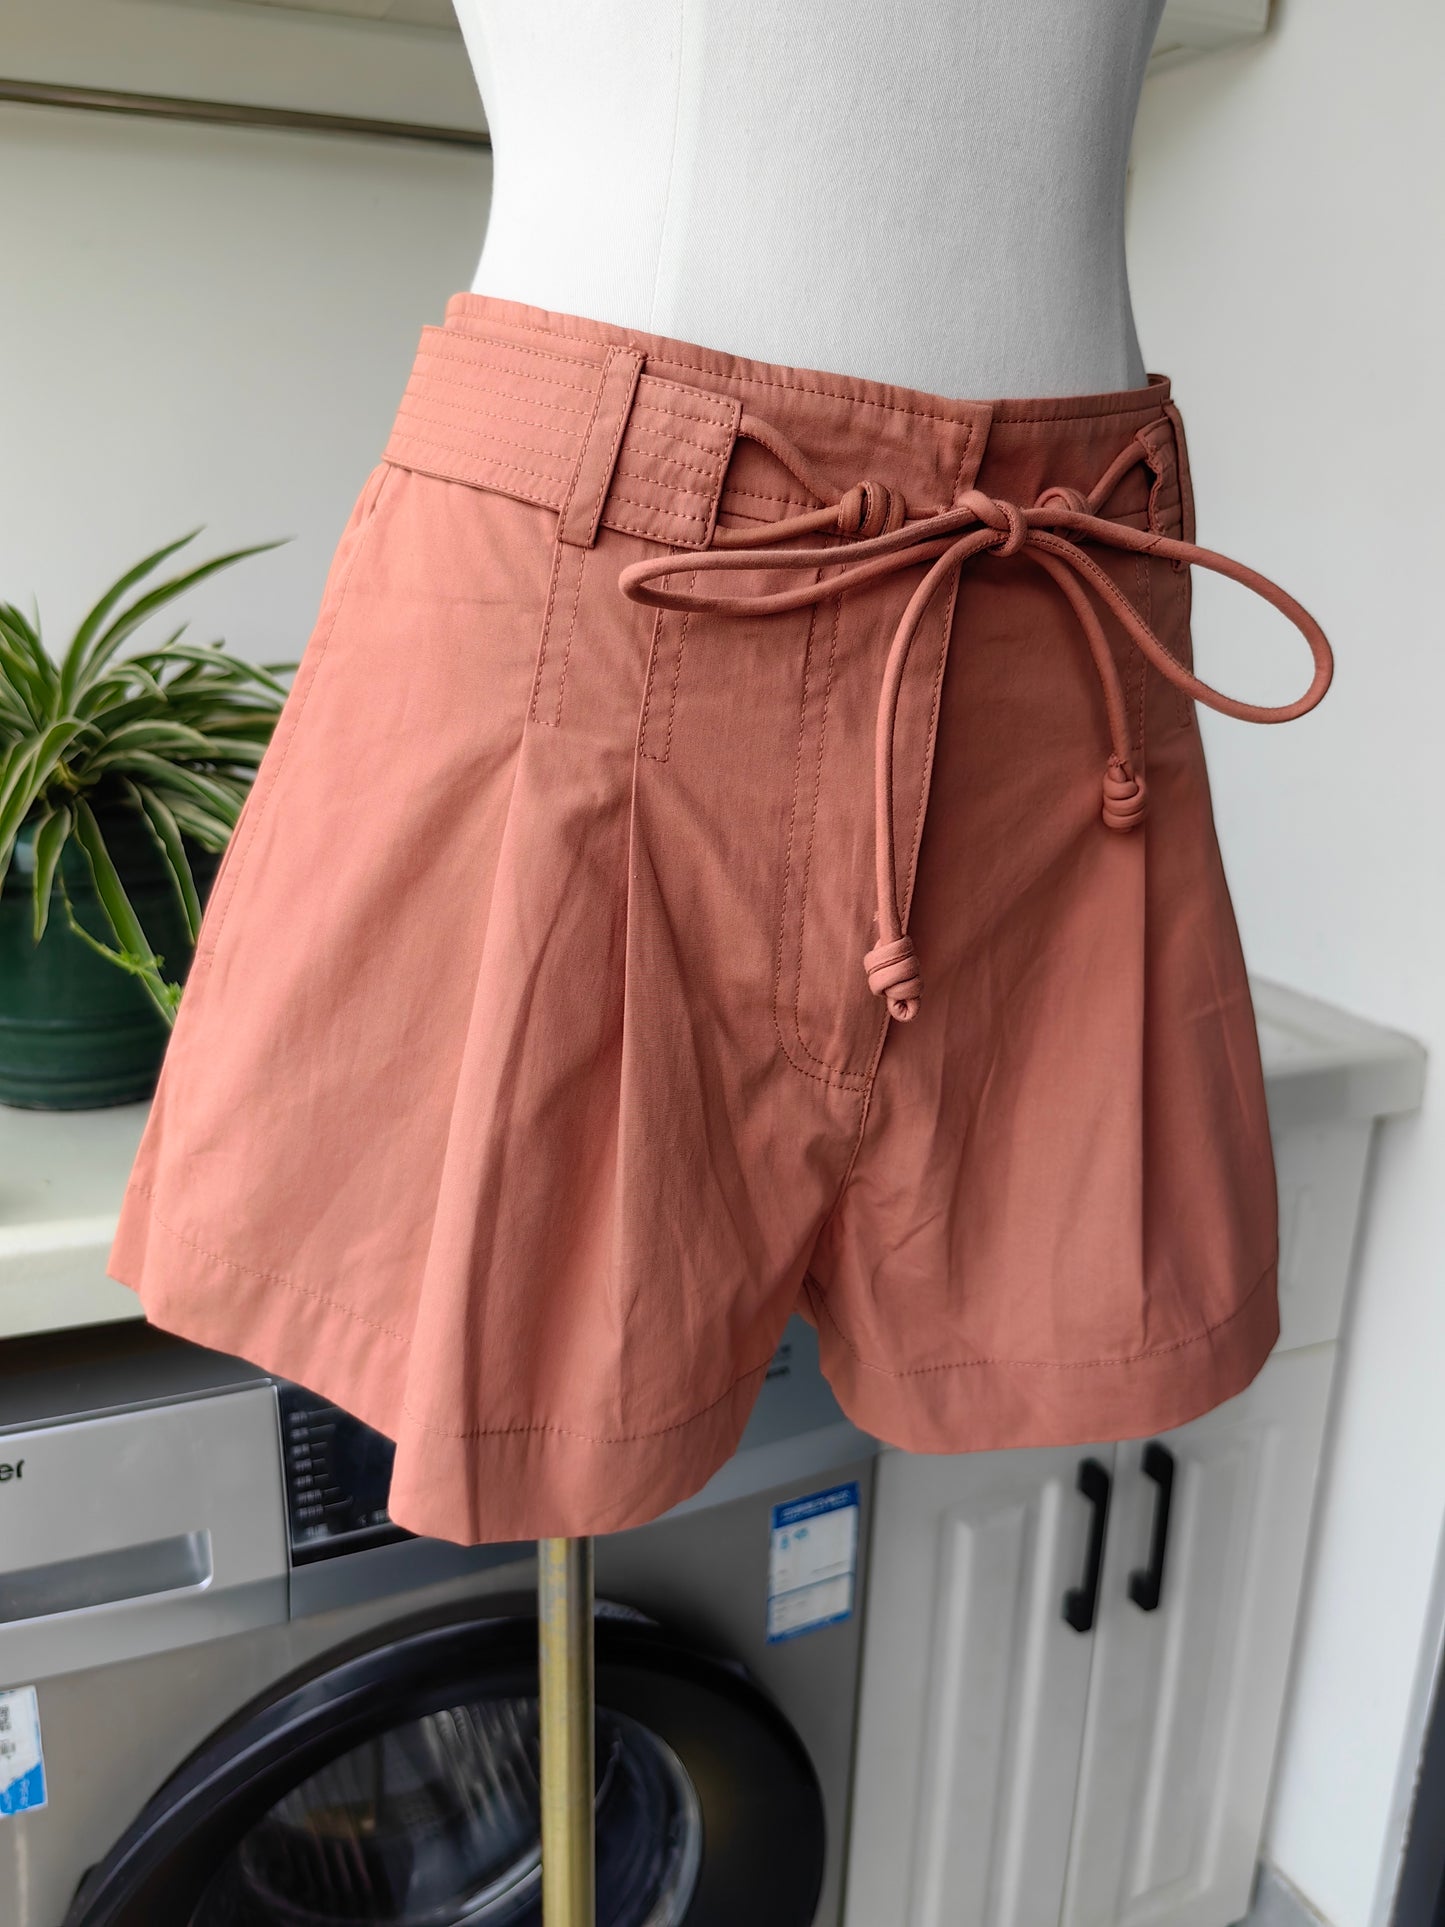 UJ Iris Cotton Belted Shorts in 3 colors